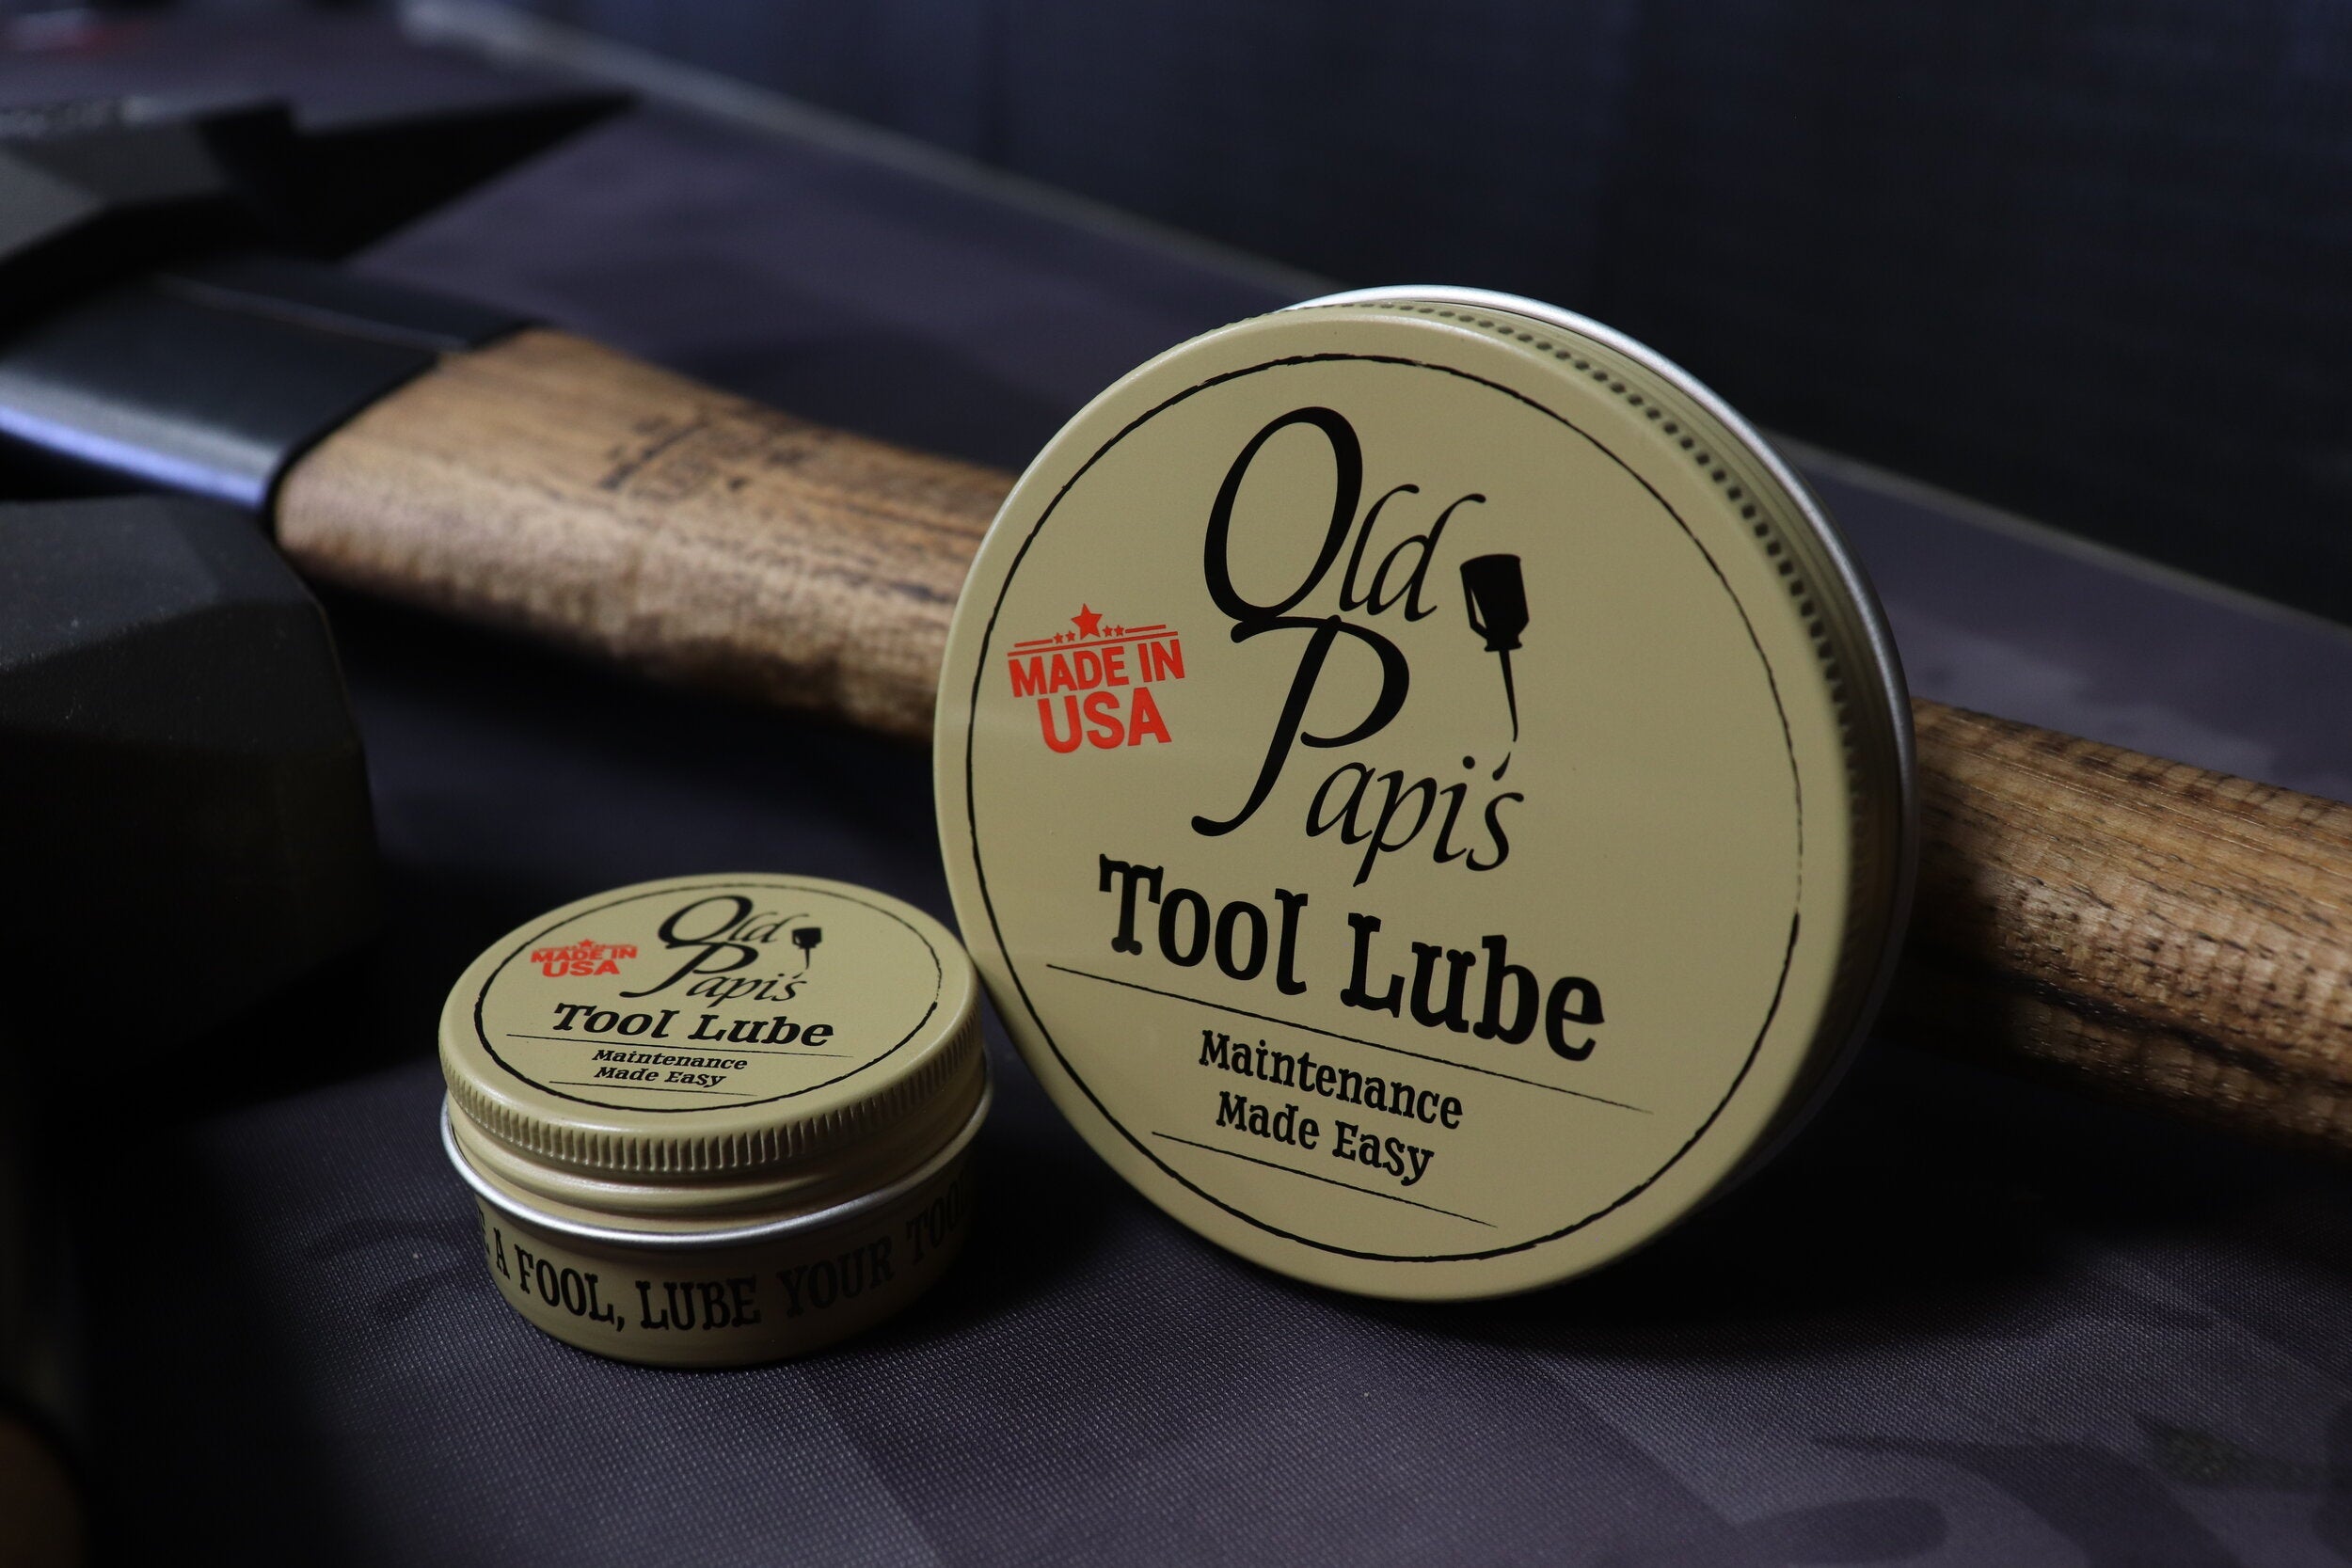 OLD PAPI'S TOOL LUBE